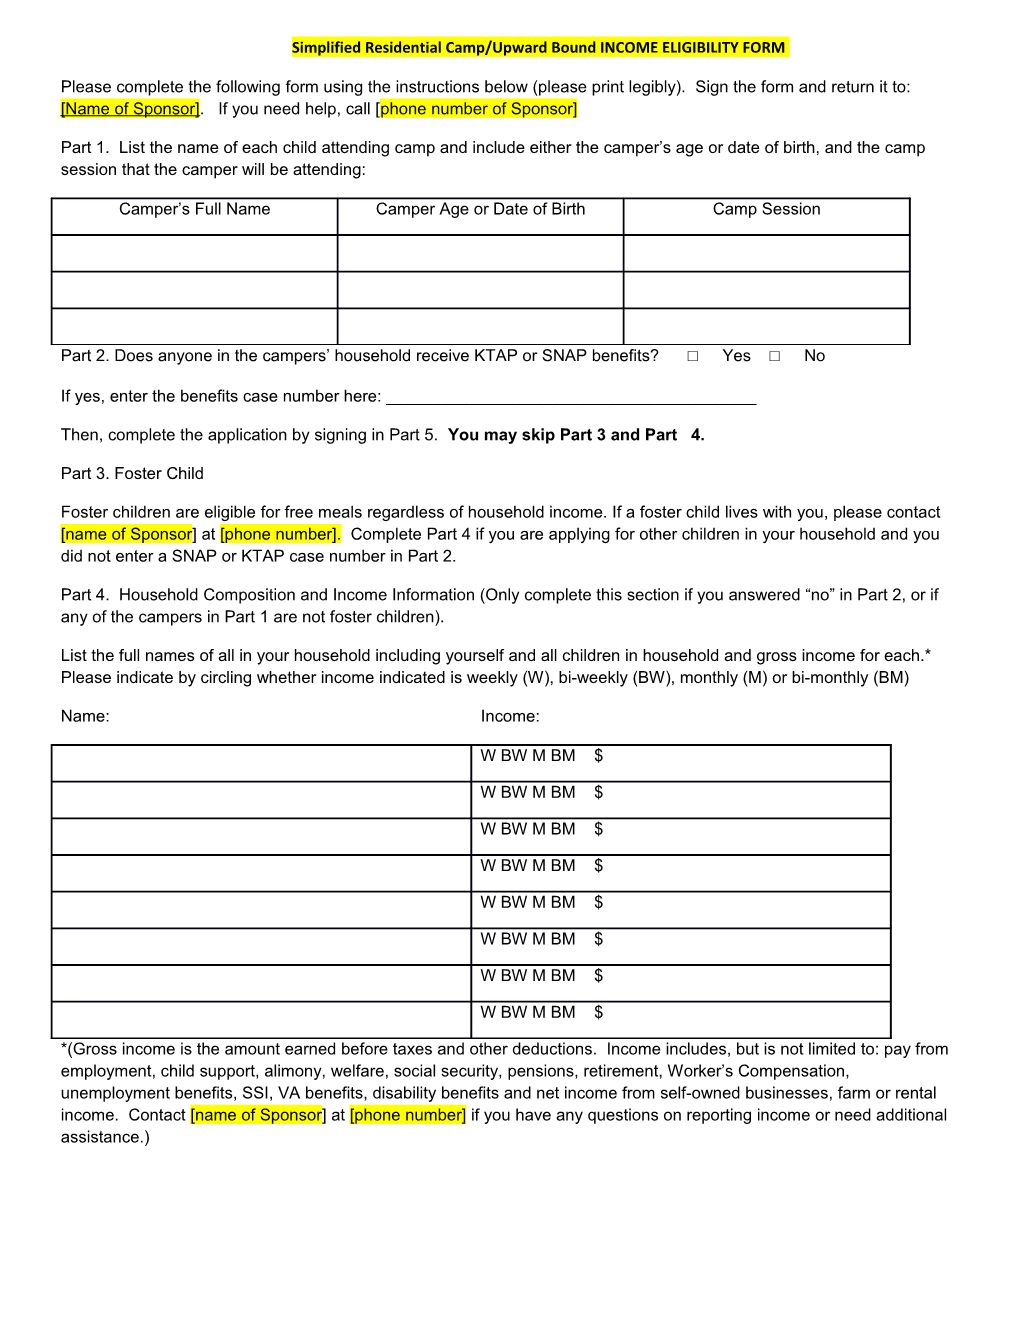 Simplified Residential Camp/Upward Bound INCOME ELIGIBILITY FORM